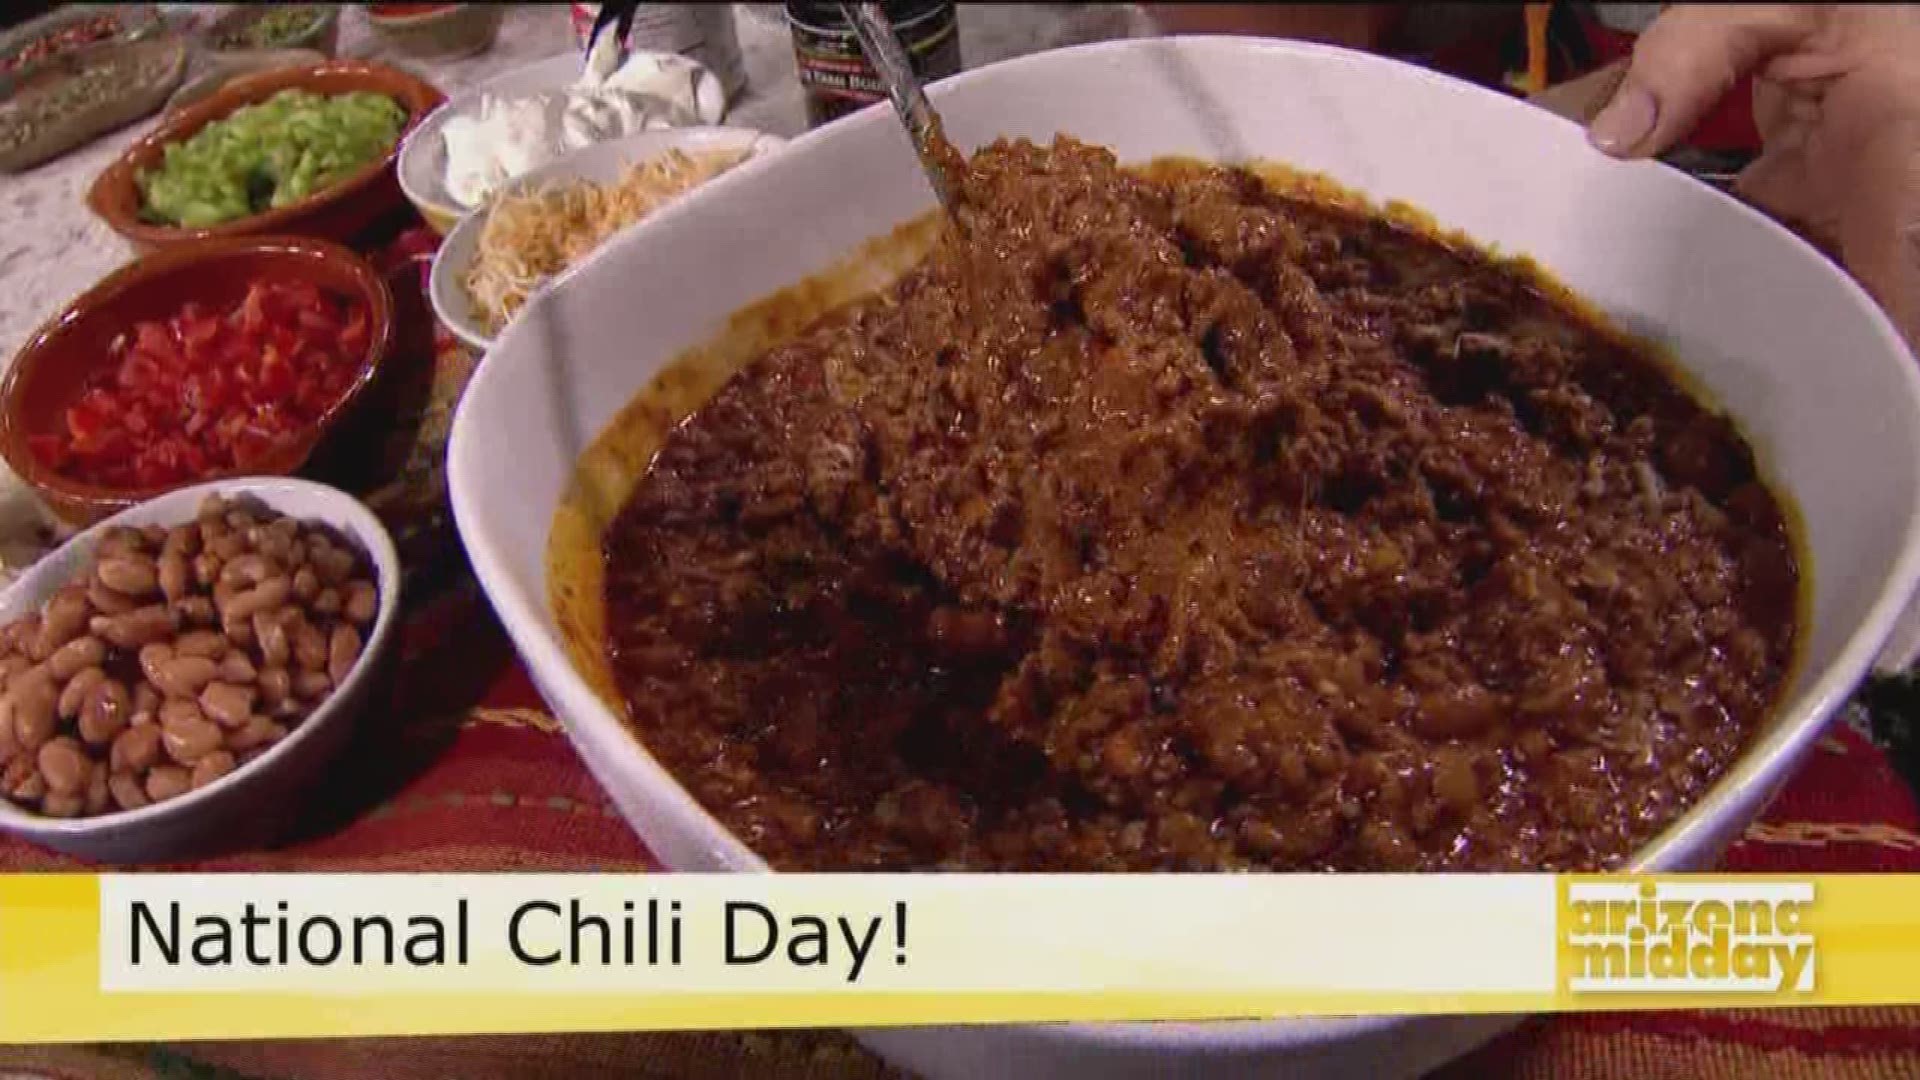 It's National Chili Day and Jan is in the kitchen with a delicious recipe